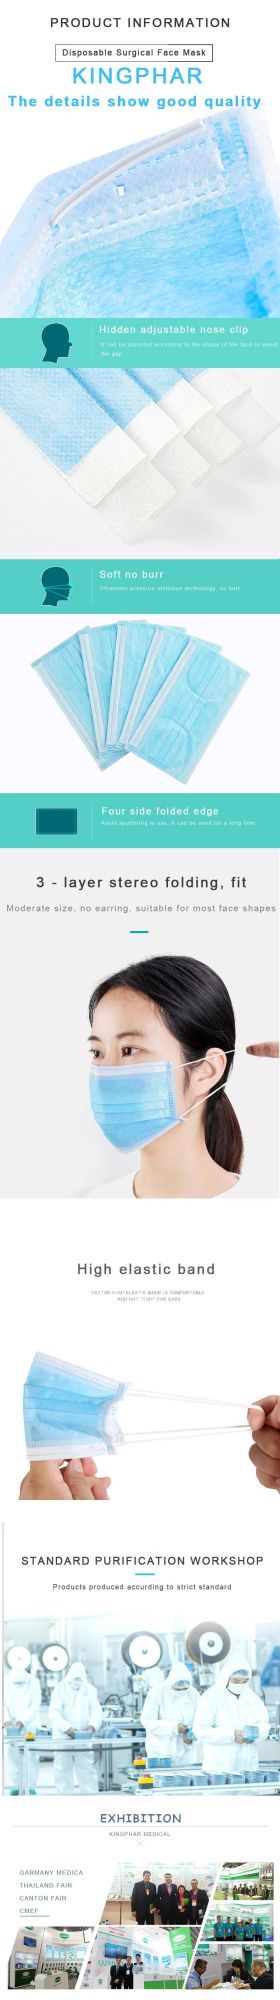 Earloop 3 Ply Surgical Face Mask